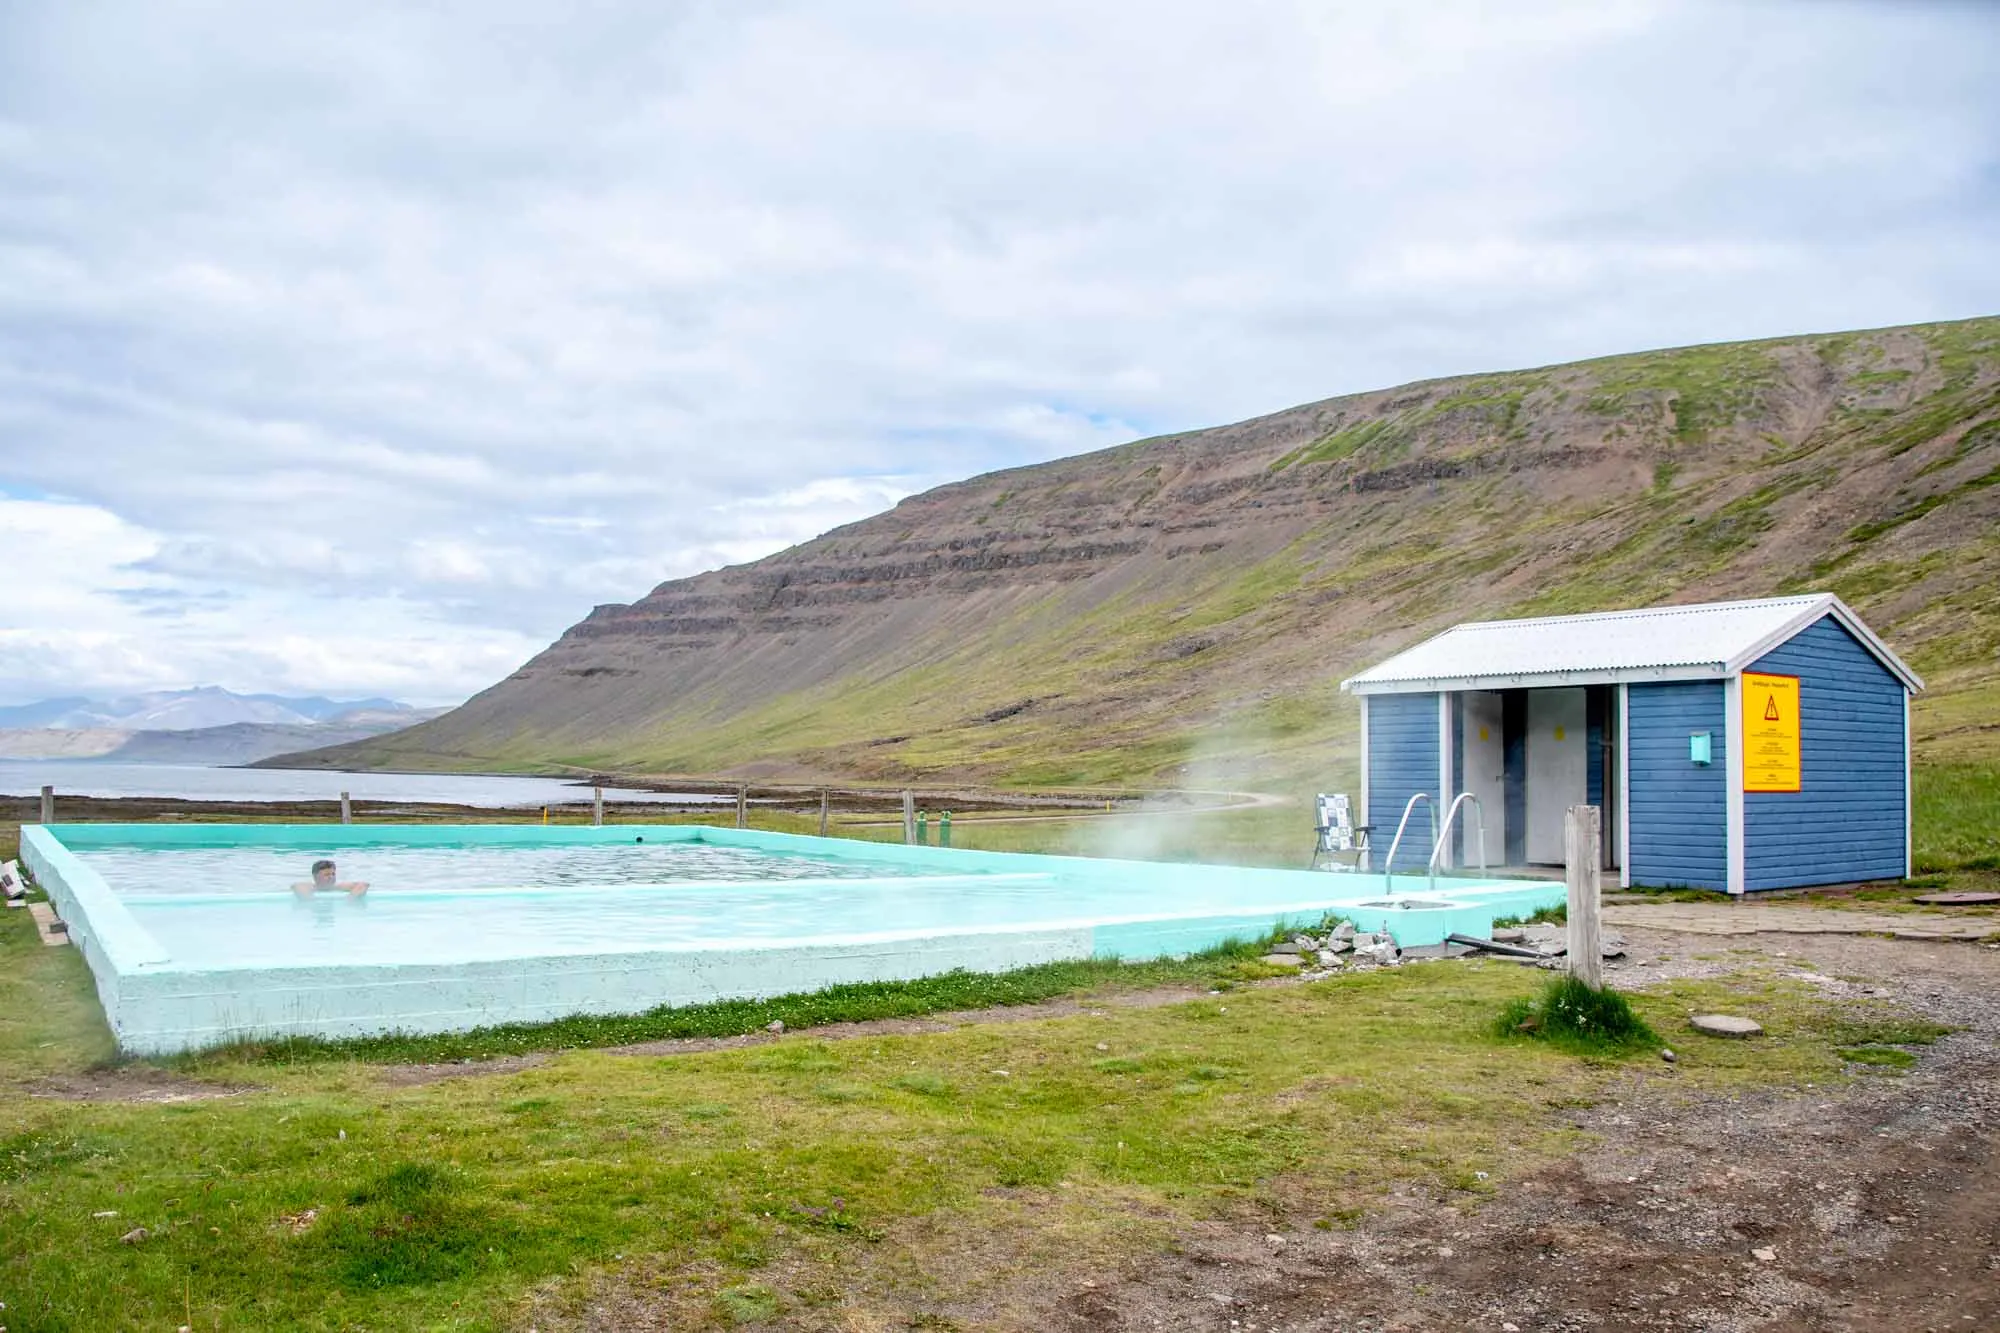 Two green Icelandic hot springs pools next to a blue changing building in the westfjords